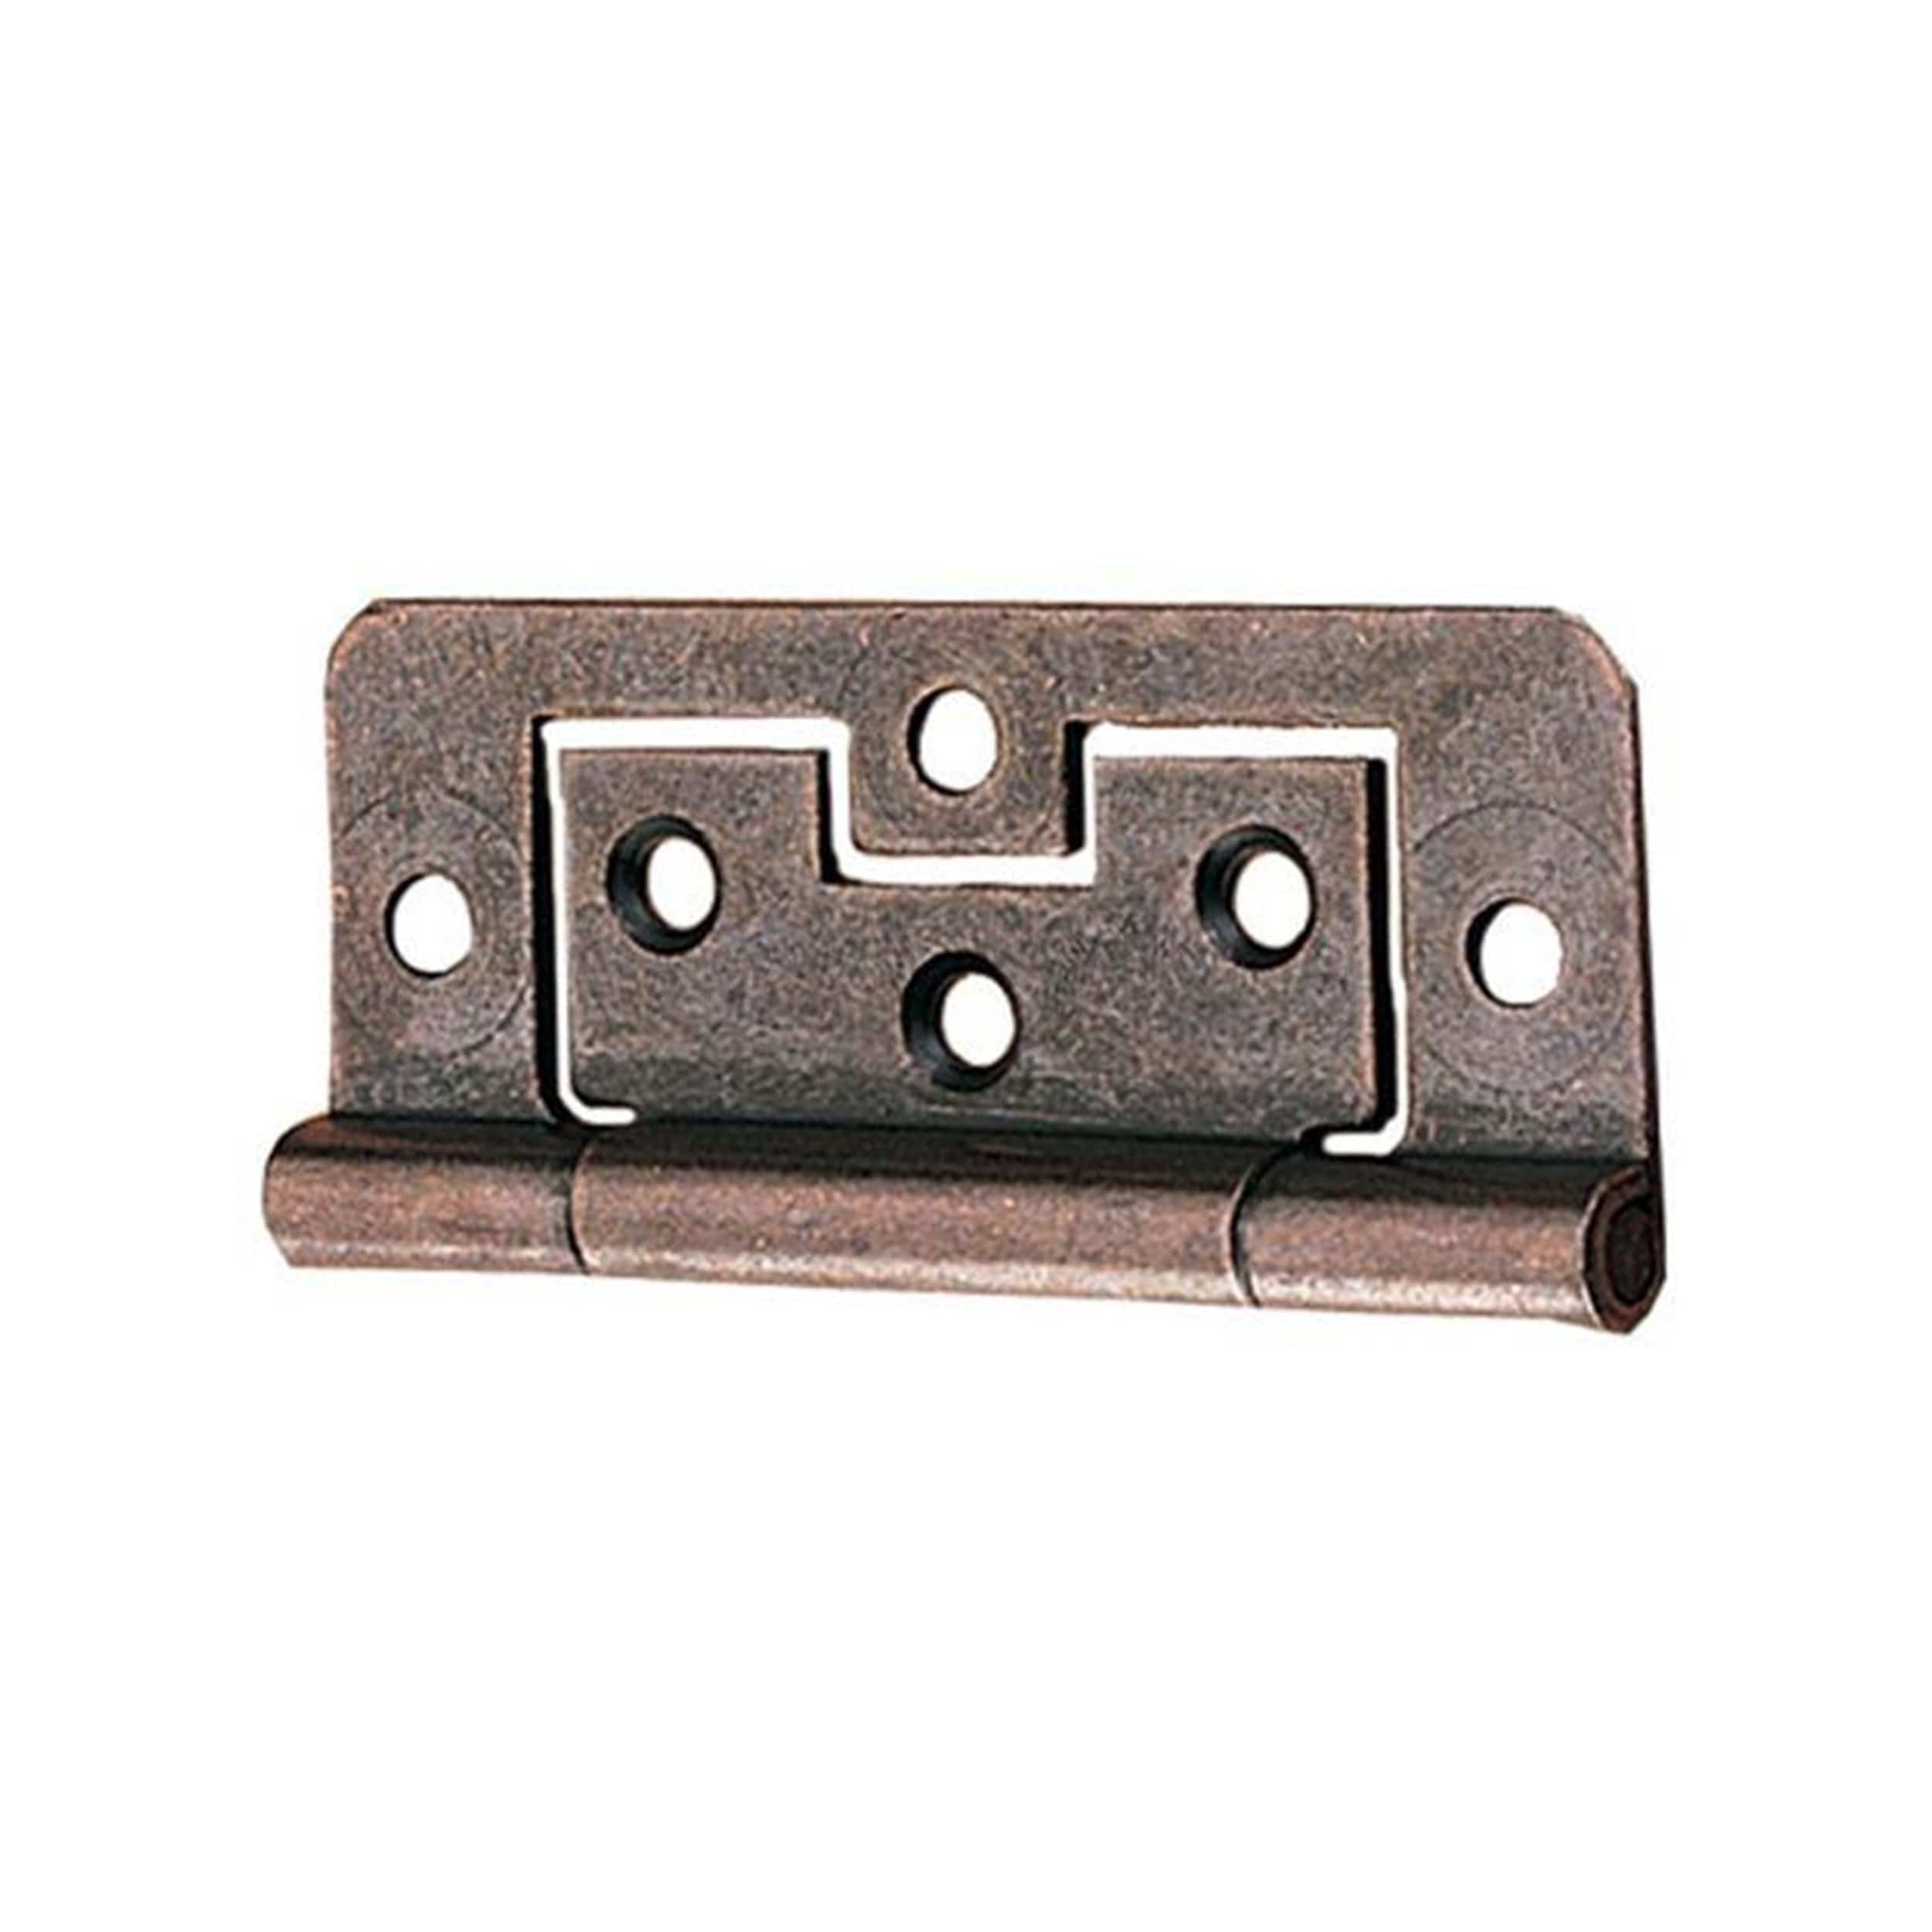 Buy Highpoint Small Box Brass Plated Hinge 23mm x 22 mm pair ,  (00d8030-HWE1) at Woodcraft